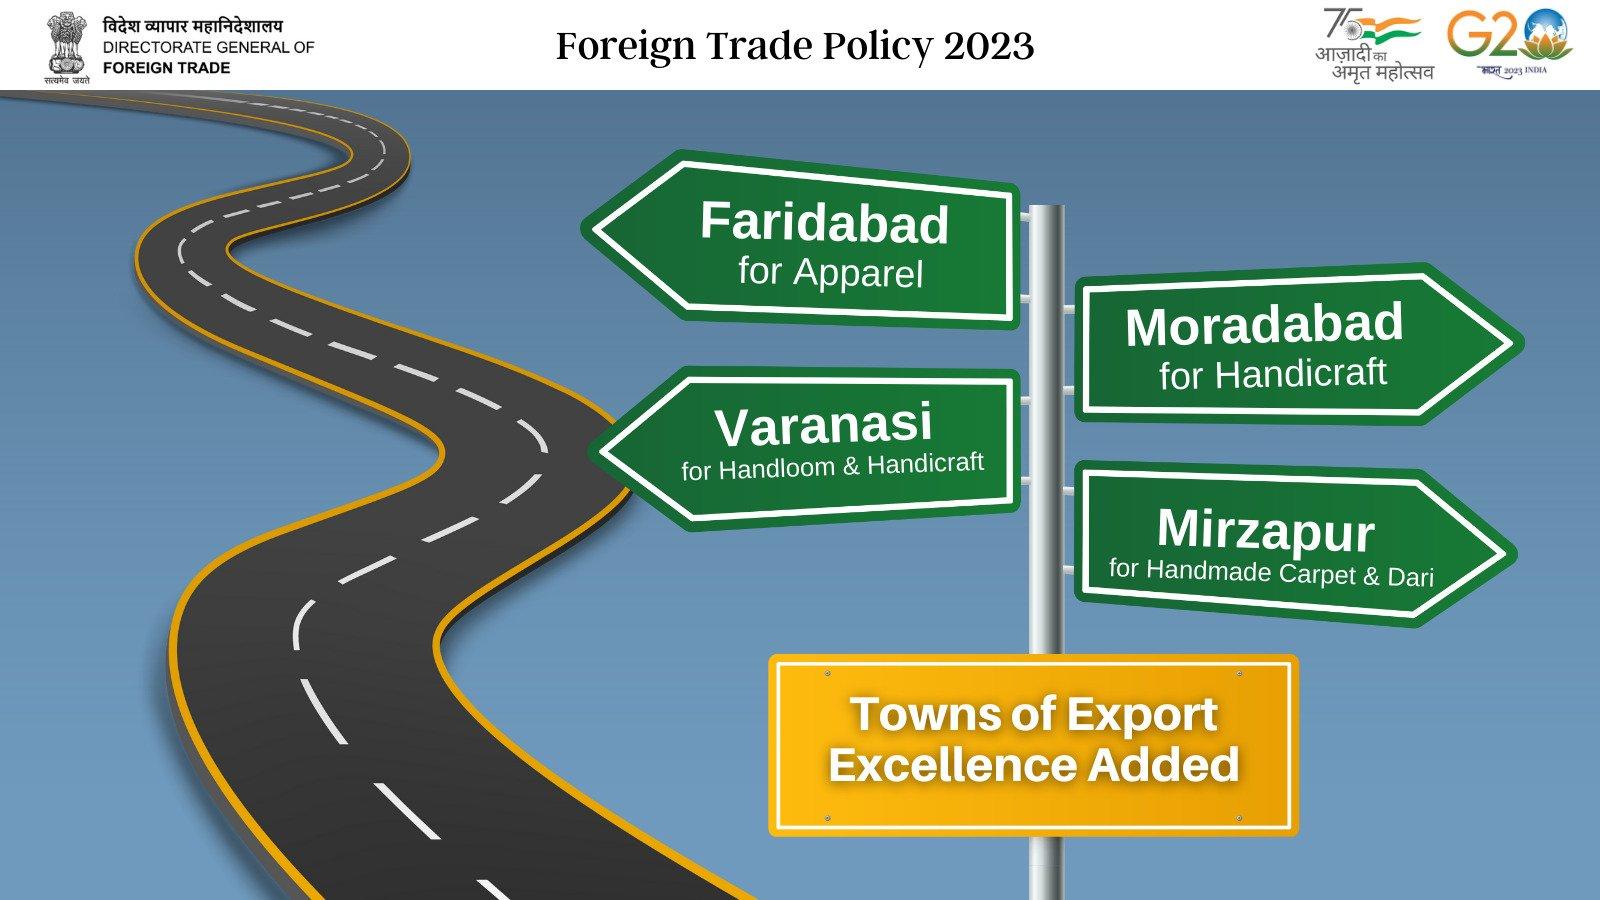 DGFT on Twitter: "During launch of the Foreign Trade Policy 2023, Hon'ble Minister of Commerce and Industry thanked Indian exporters for making India achieve record exports of $760 Bn. 3/n https://t.co/vQFyDZ20Yq" /